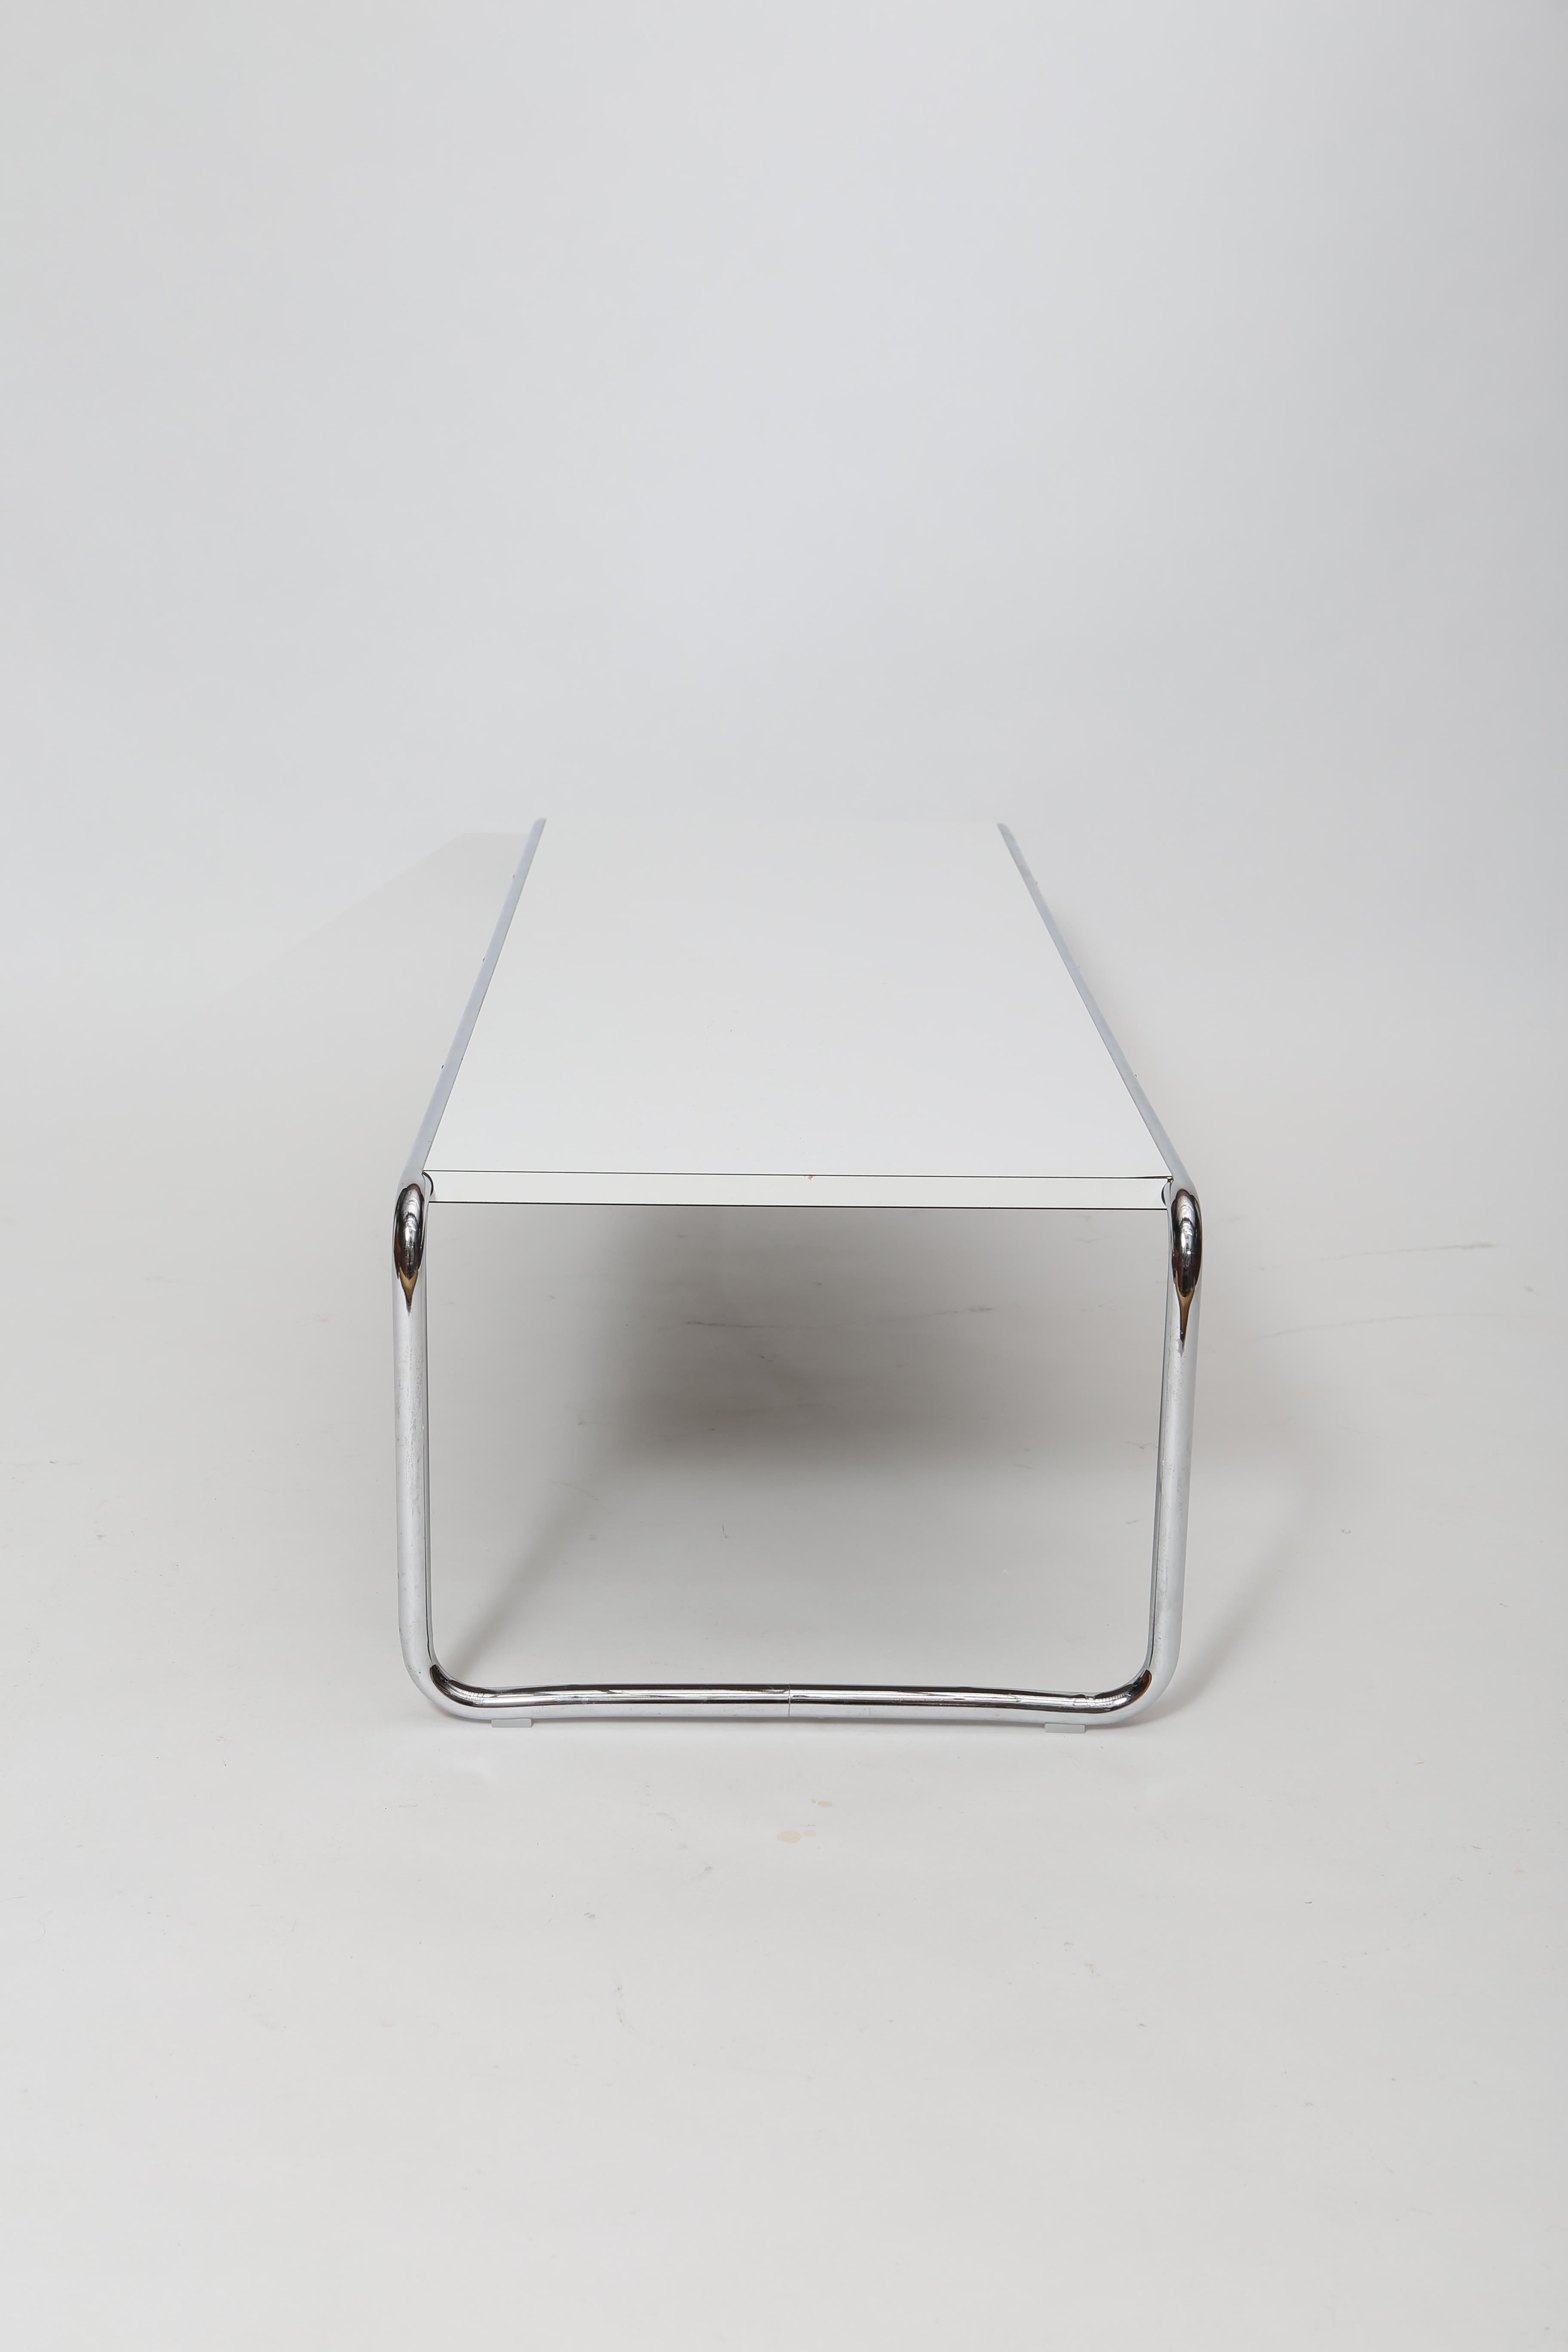 Marcel Breuer’s designs are enduring and the Laccio coffee table is no exception. Constructed of chromed steel tubing with a white laminated mdf core top, this table has a nice scale and effortless chic appeal. In excellent condition with little to